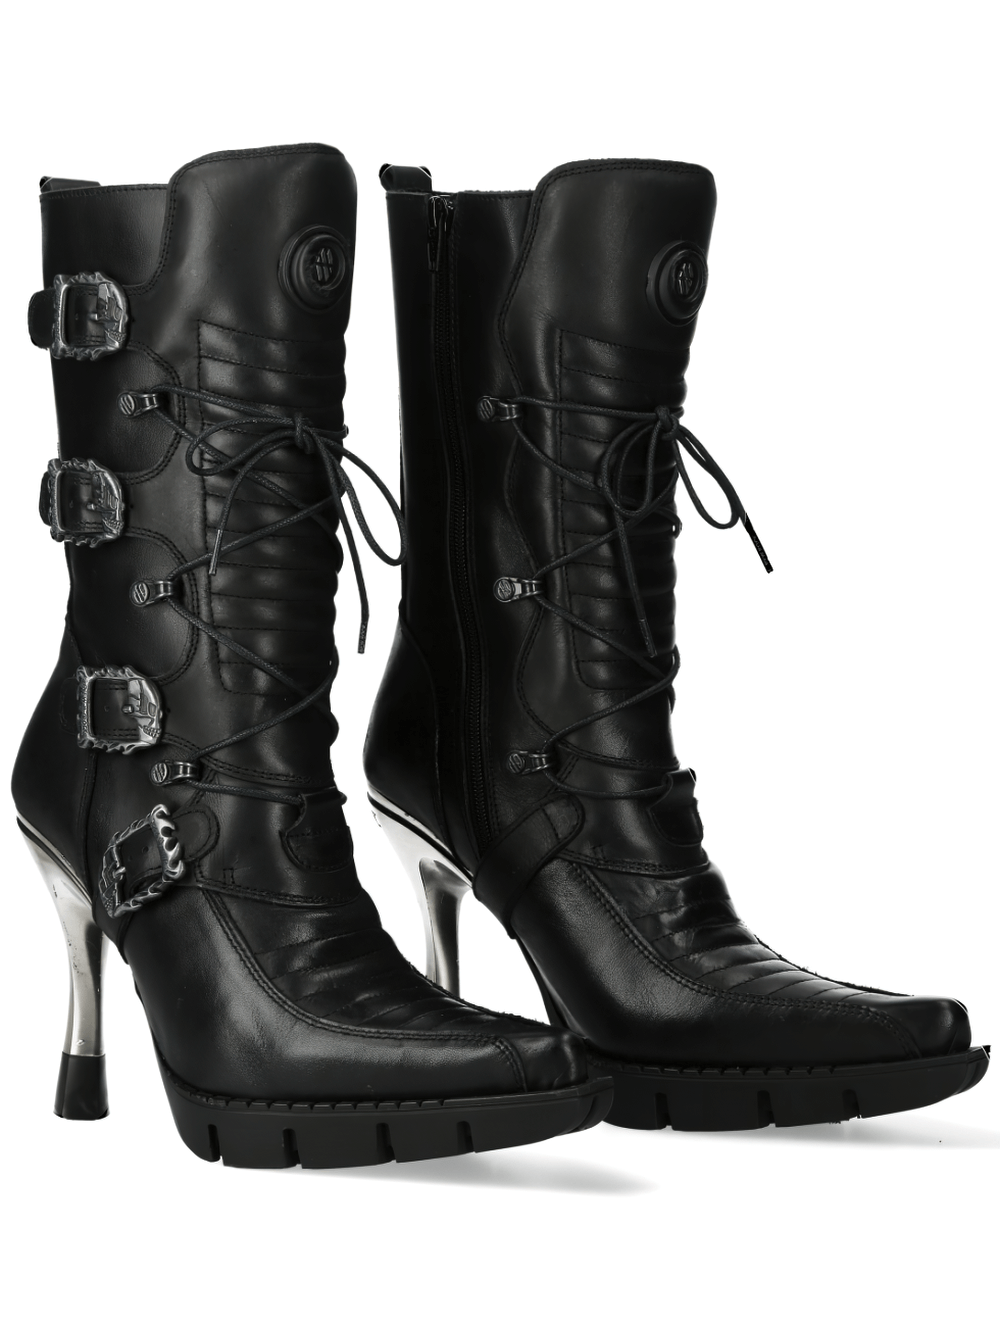 NEW ROCK Chic Urban Black Buckled Lace-Up Heel Boots